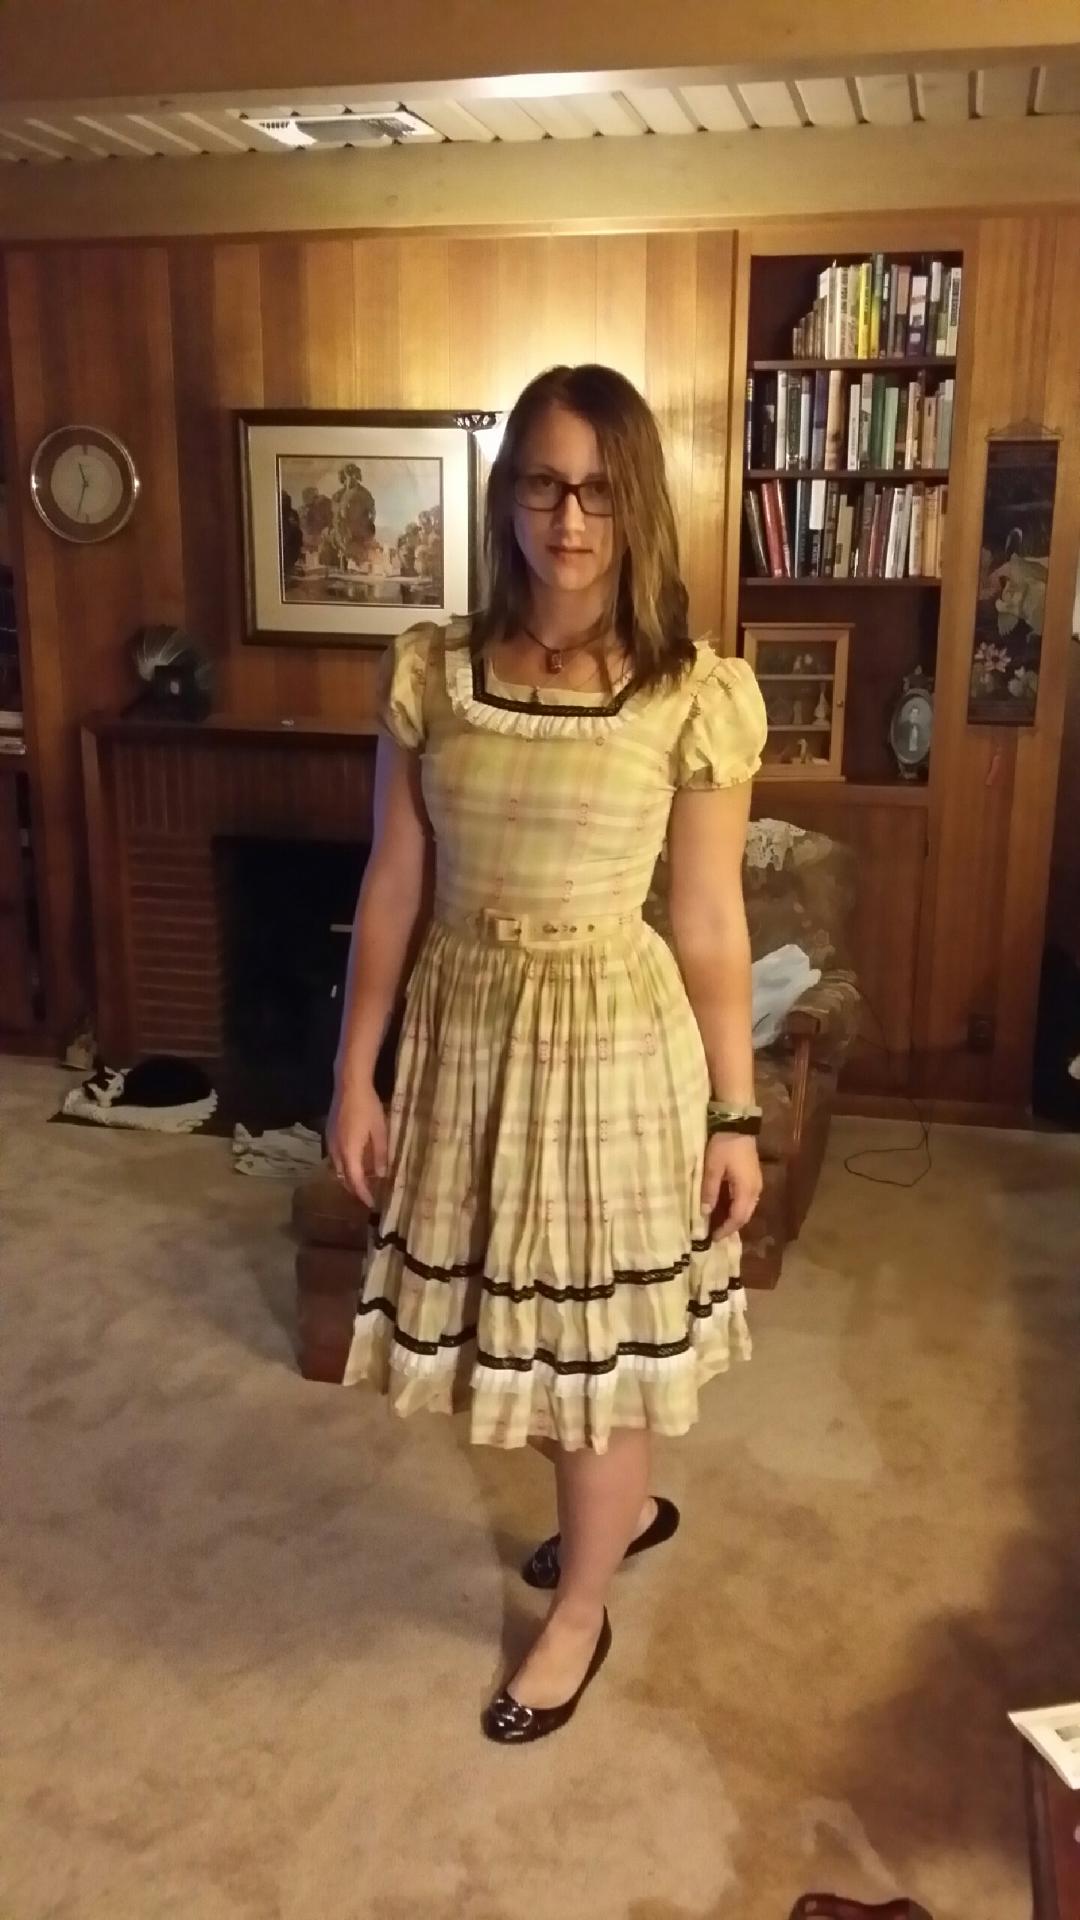 This dress is from the end of the 50s early 60s. Been in my hubbys family for decades. Now I fit it perfectly lol! And there are two others in different patterns and colors!